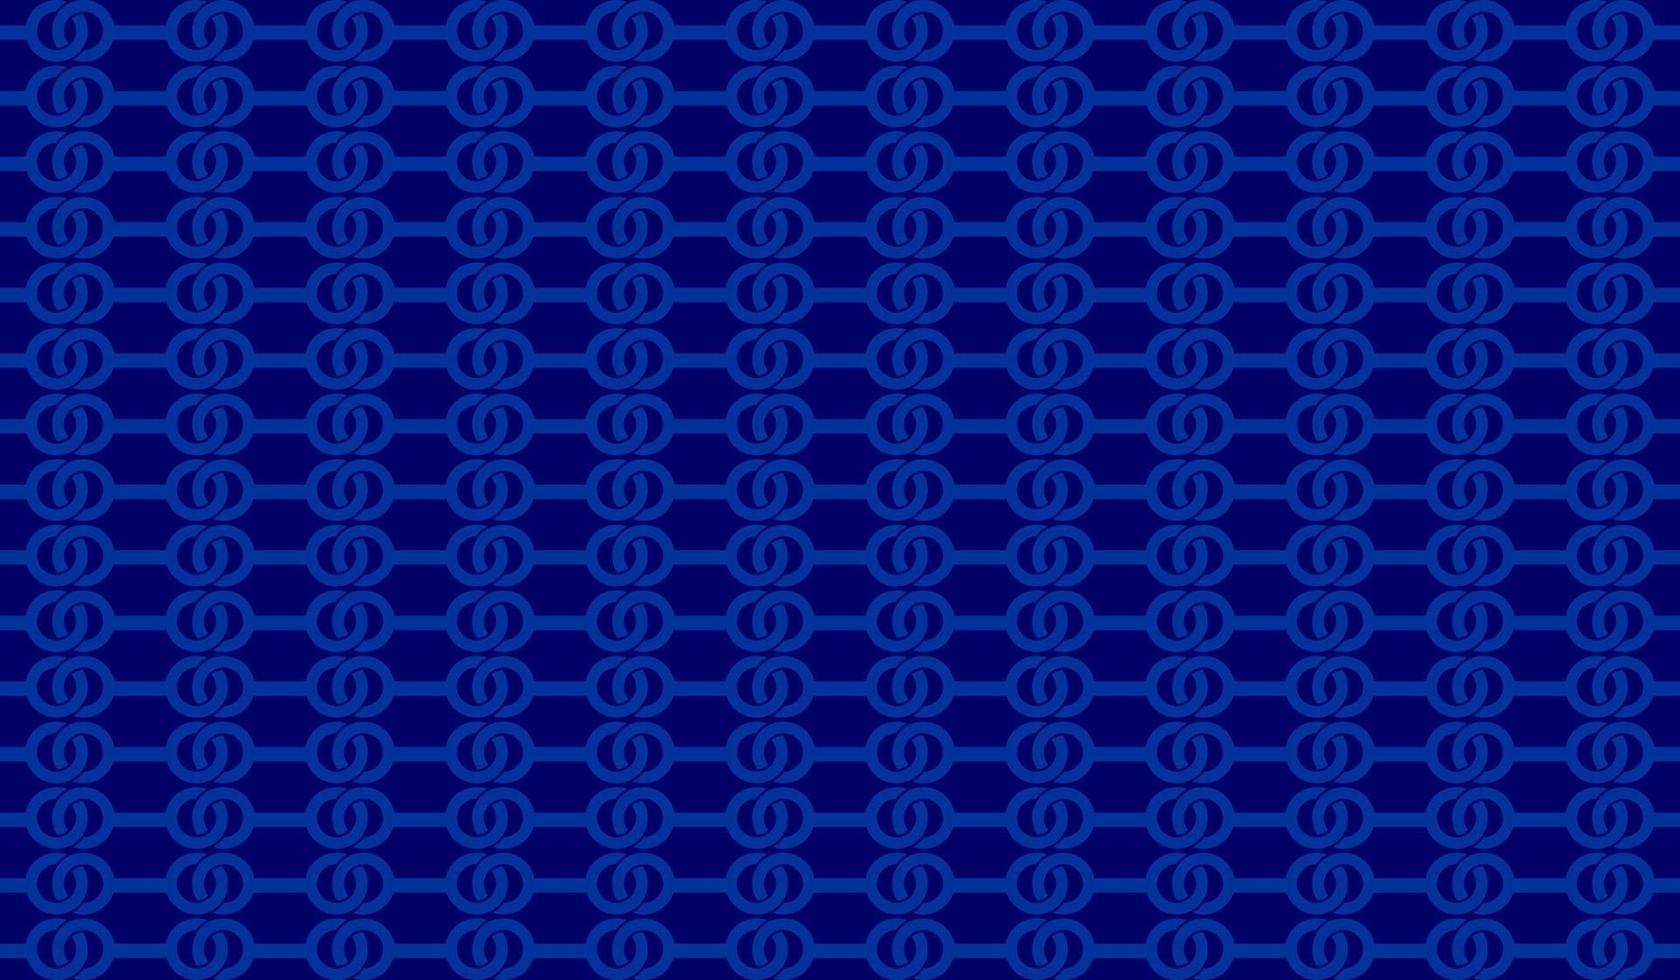 dark blue square chain. Creative, attractive and modern illustrations. Textures to complement your business or design needs vector